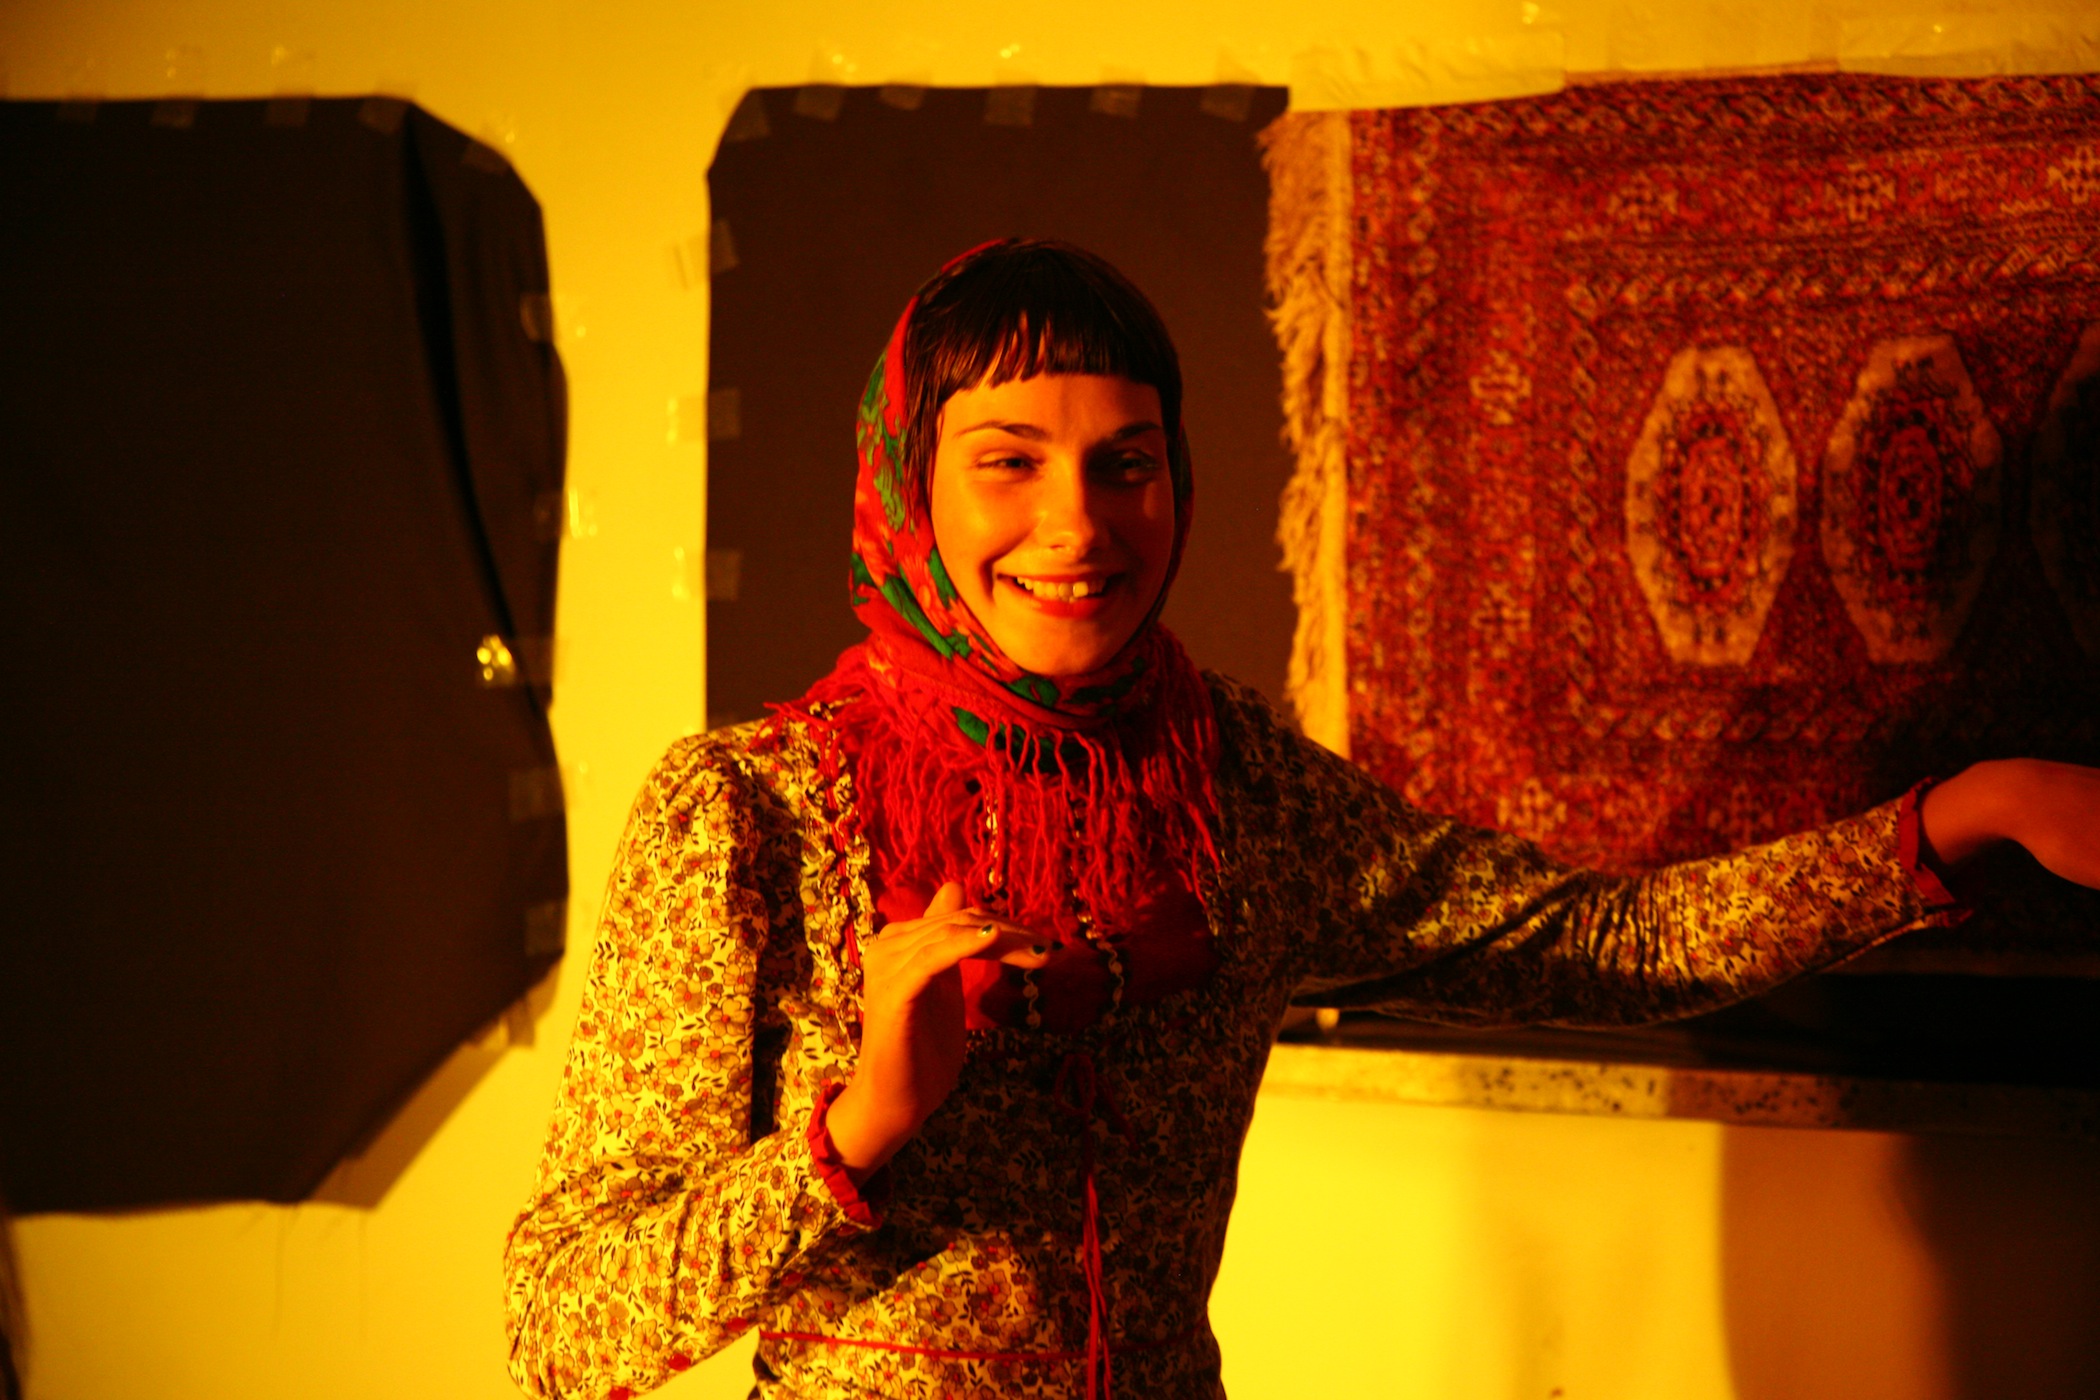 Ira performing in an installation by fellow student Chatlin Helm, November 2011 (Photo by Irina Stelea)